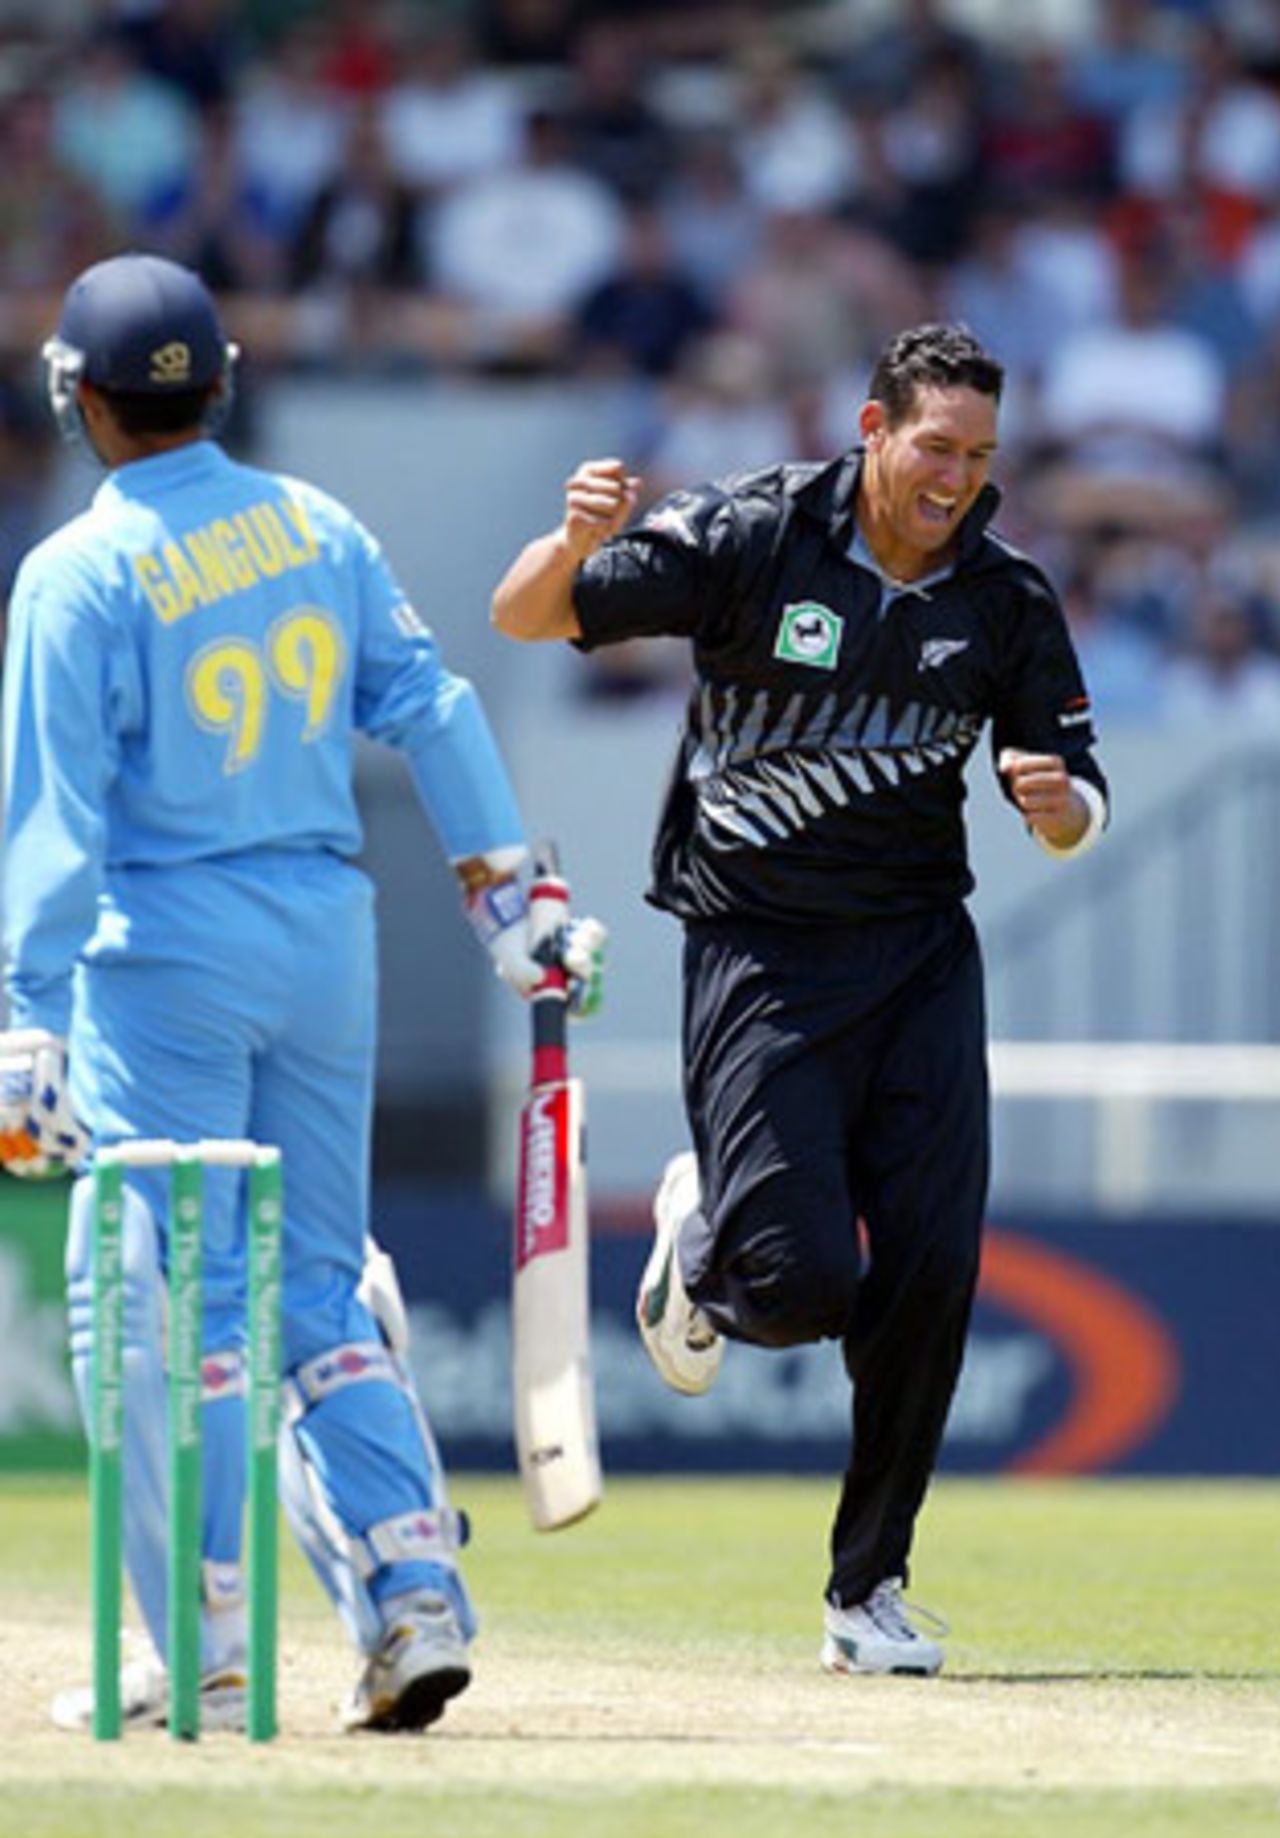 New Zealand bowler Daryl Tuffey celebrates the dismissal of Indian batsman Sourav Ganguly, caught by wicket-keeper Brendon McCullum for four. 3rd ODI: New Zealand v India at Jade Stadium, Christchurch, 1 January 2003.